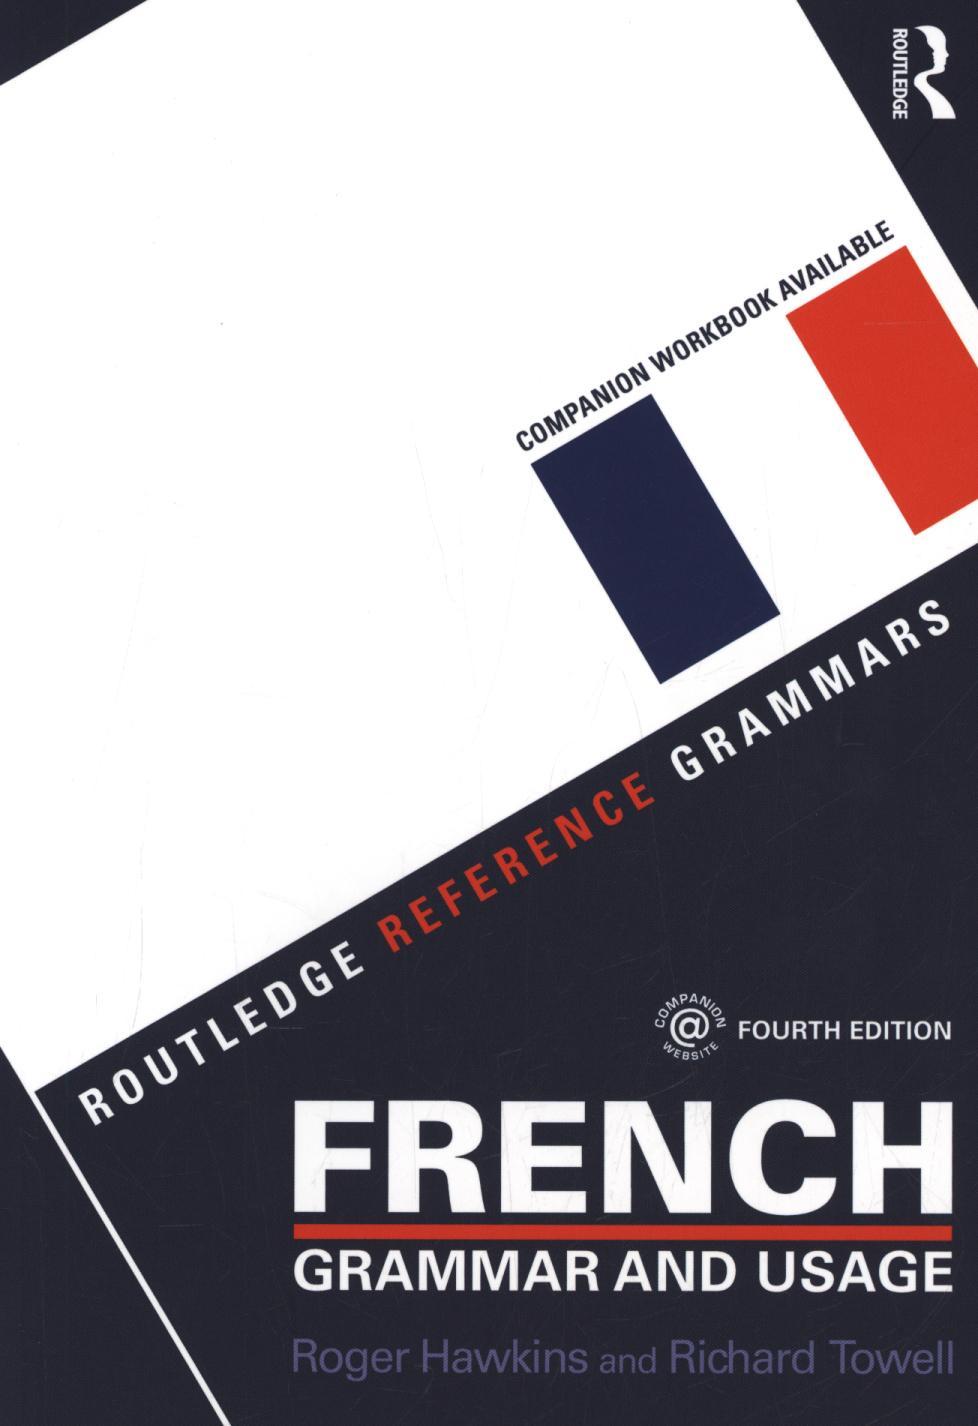 French Grammar and Usage